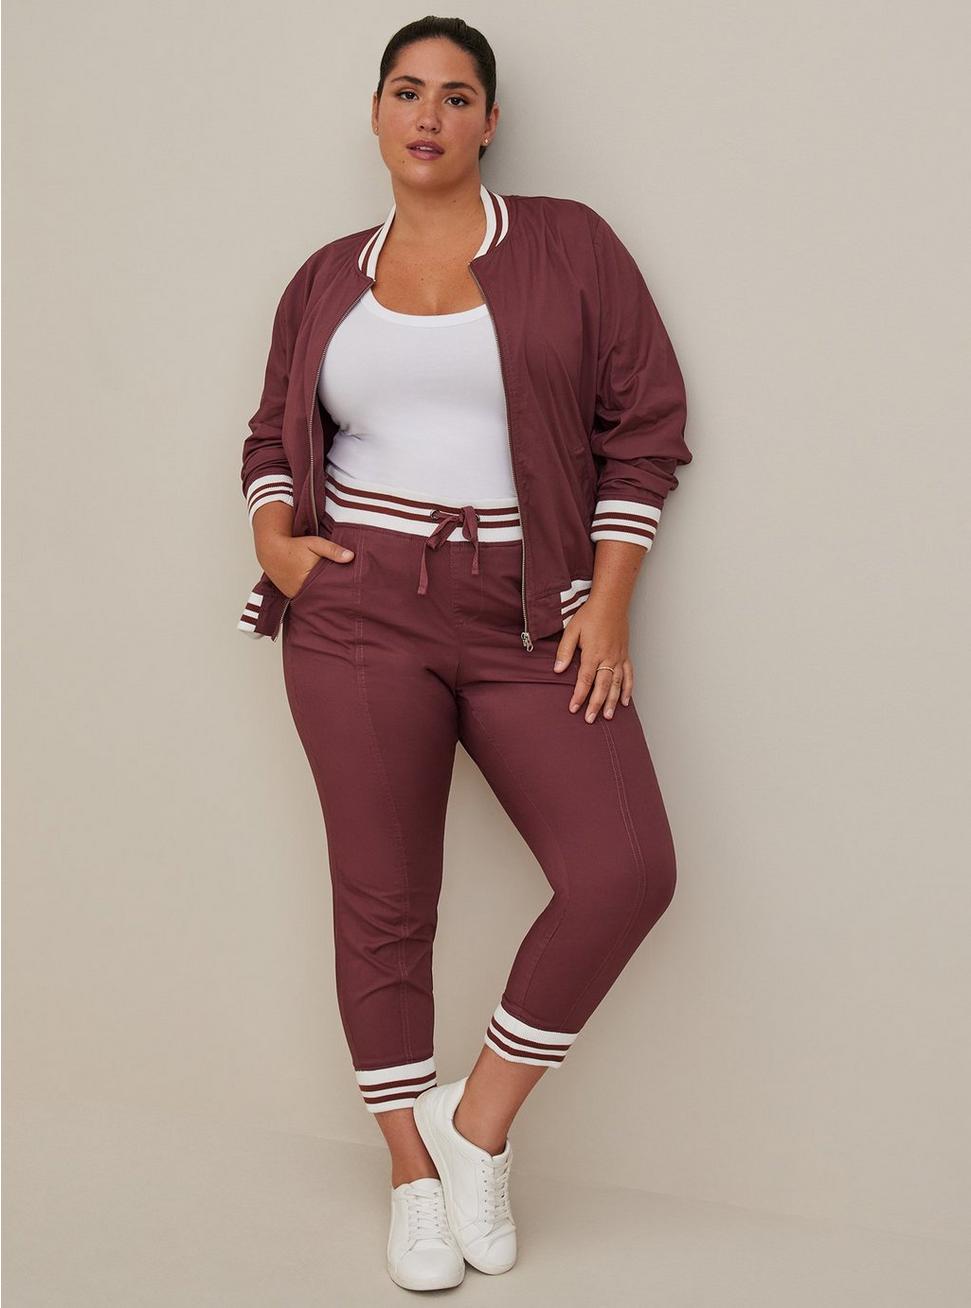 Classic Fit Jogger Stretch Poplin Mid-Rise Pant, WILD GINGER BURGUNDY, hi-res